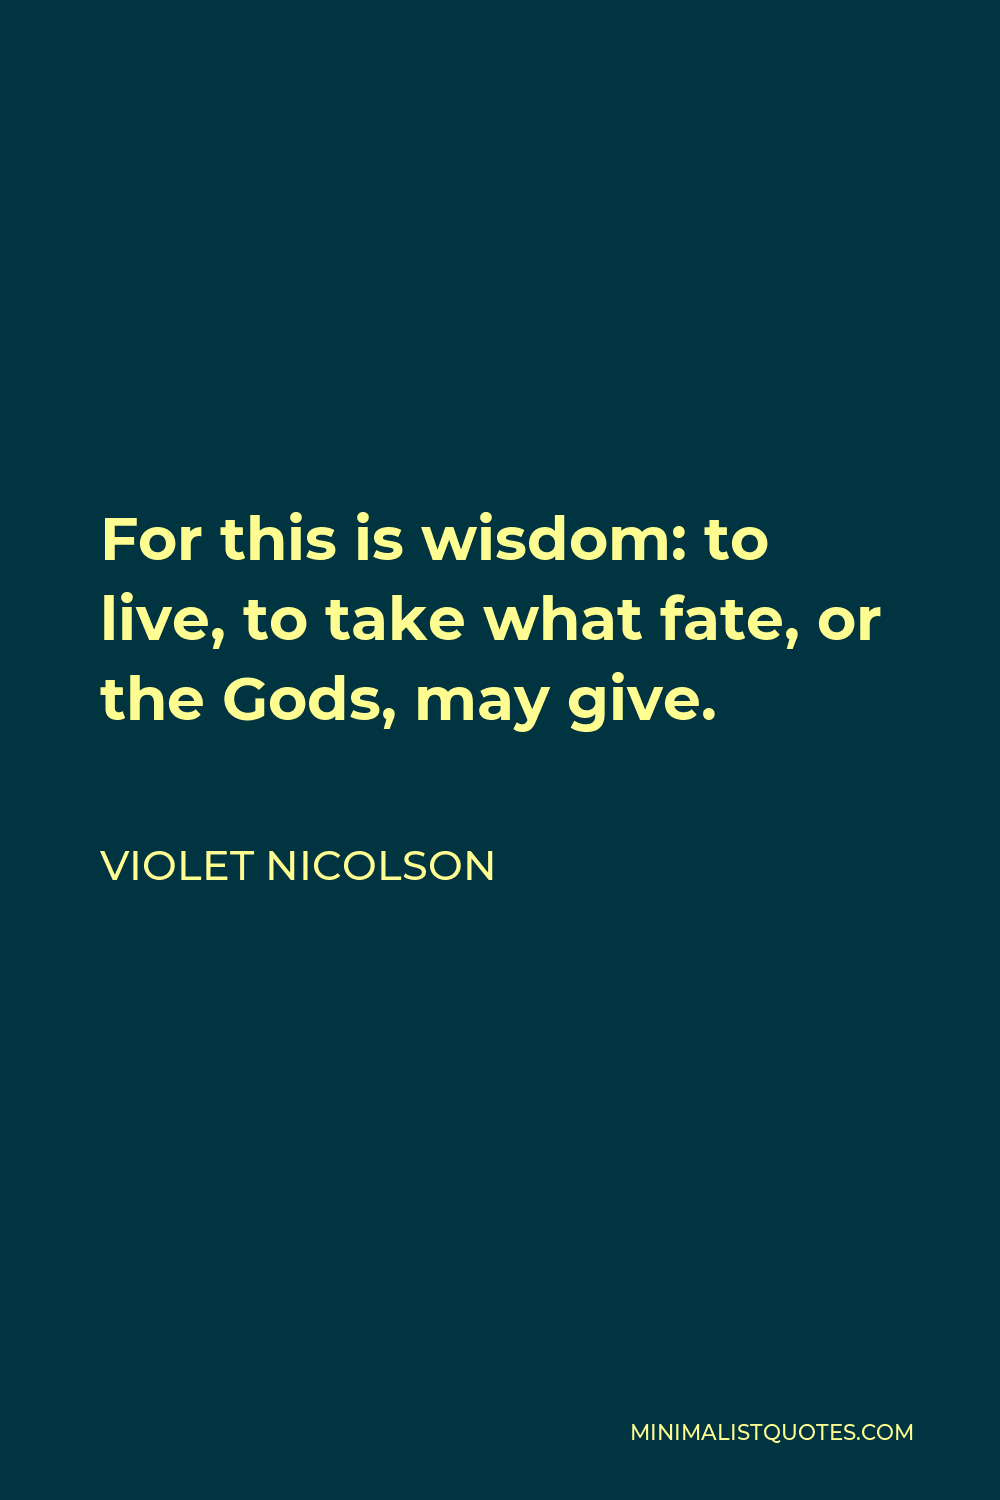 Violet Nicolson Quote - For this is wisdom: to live, to take what fate, or the Gods, may give.